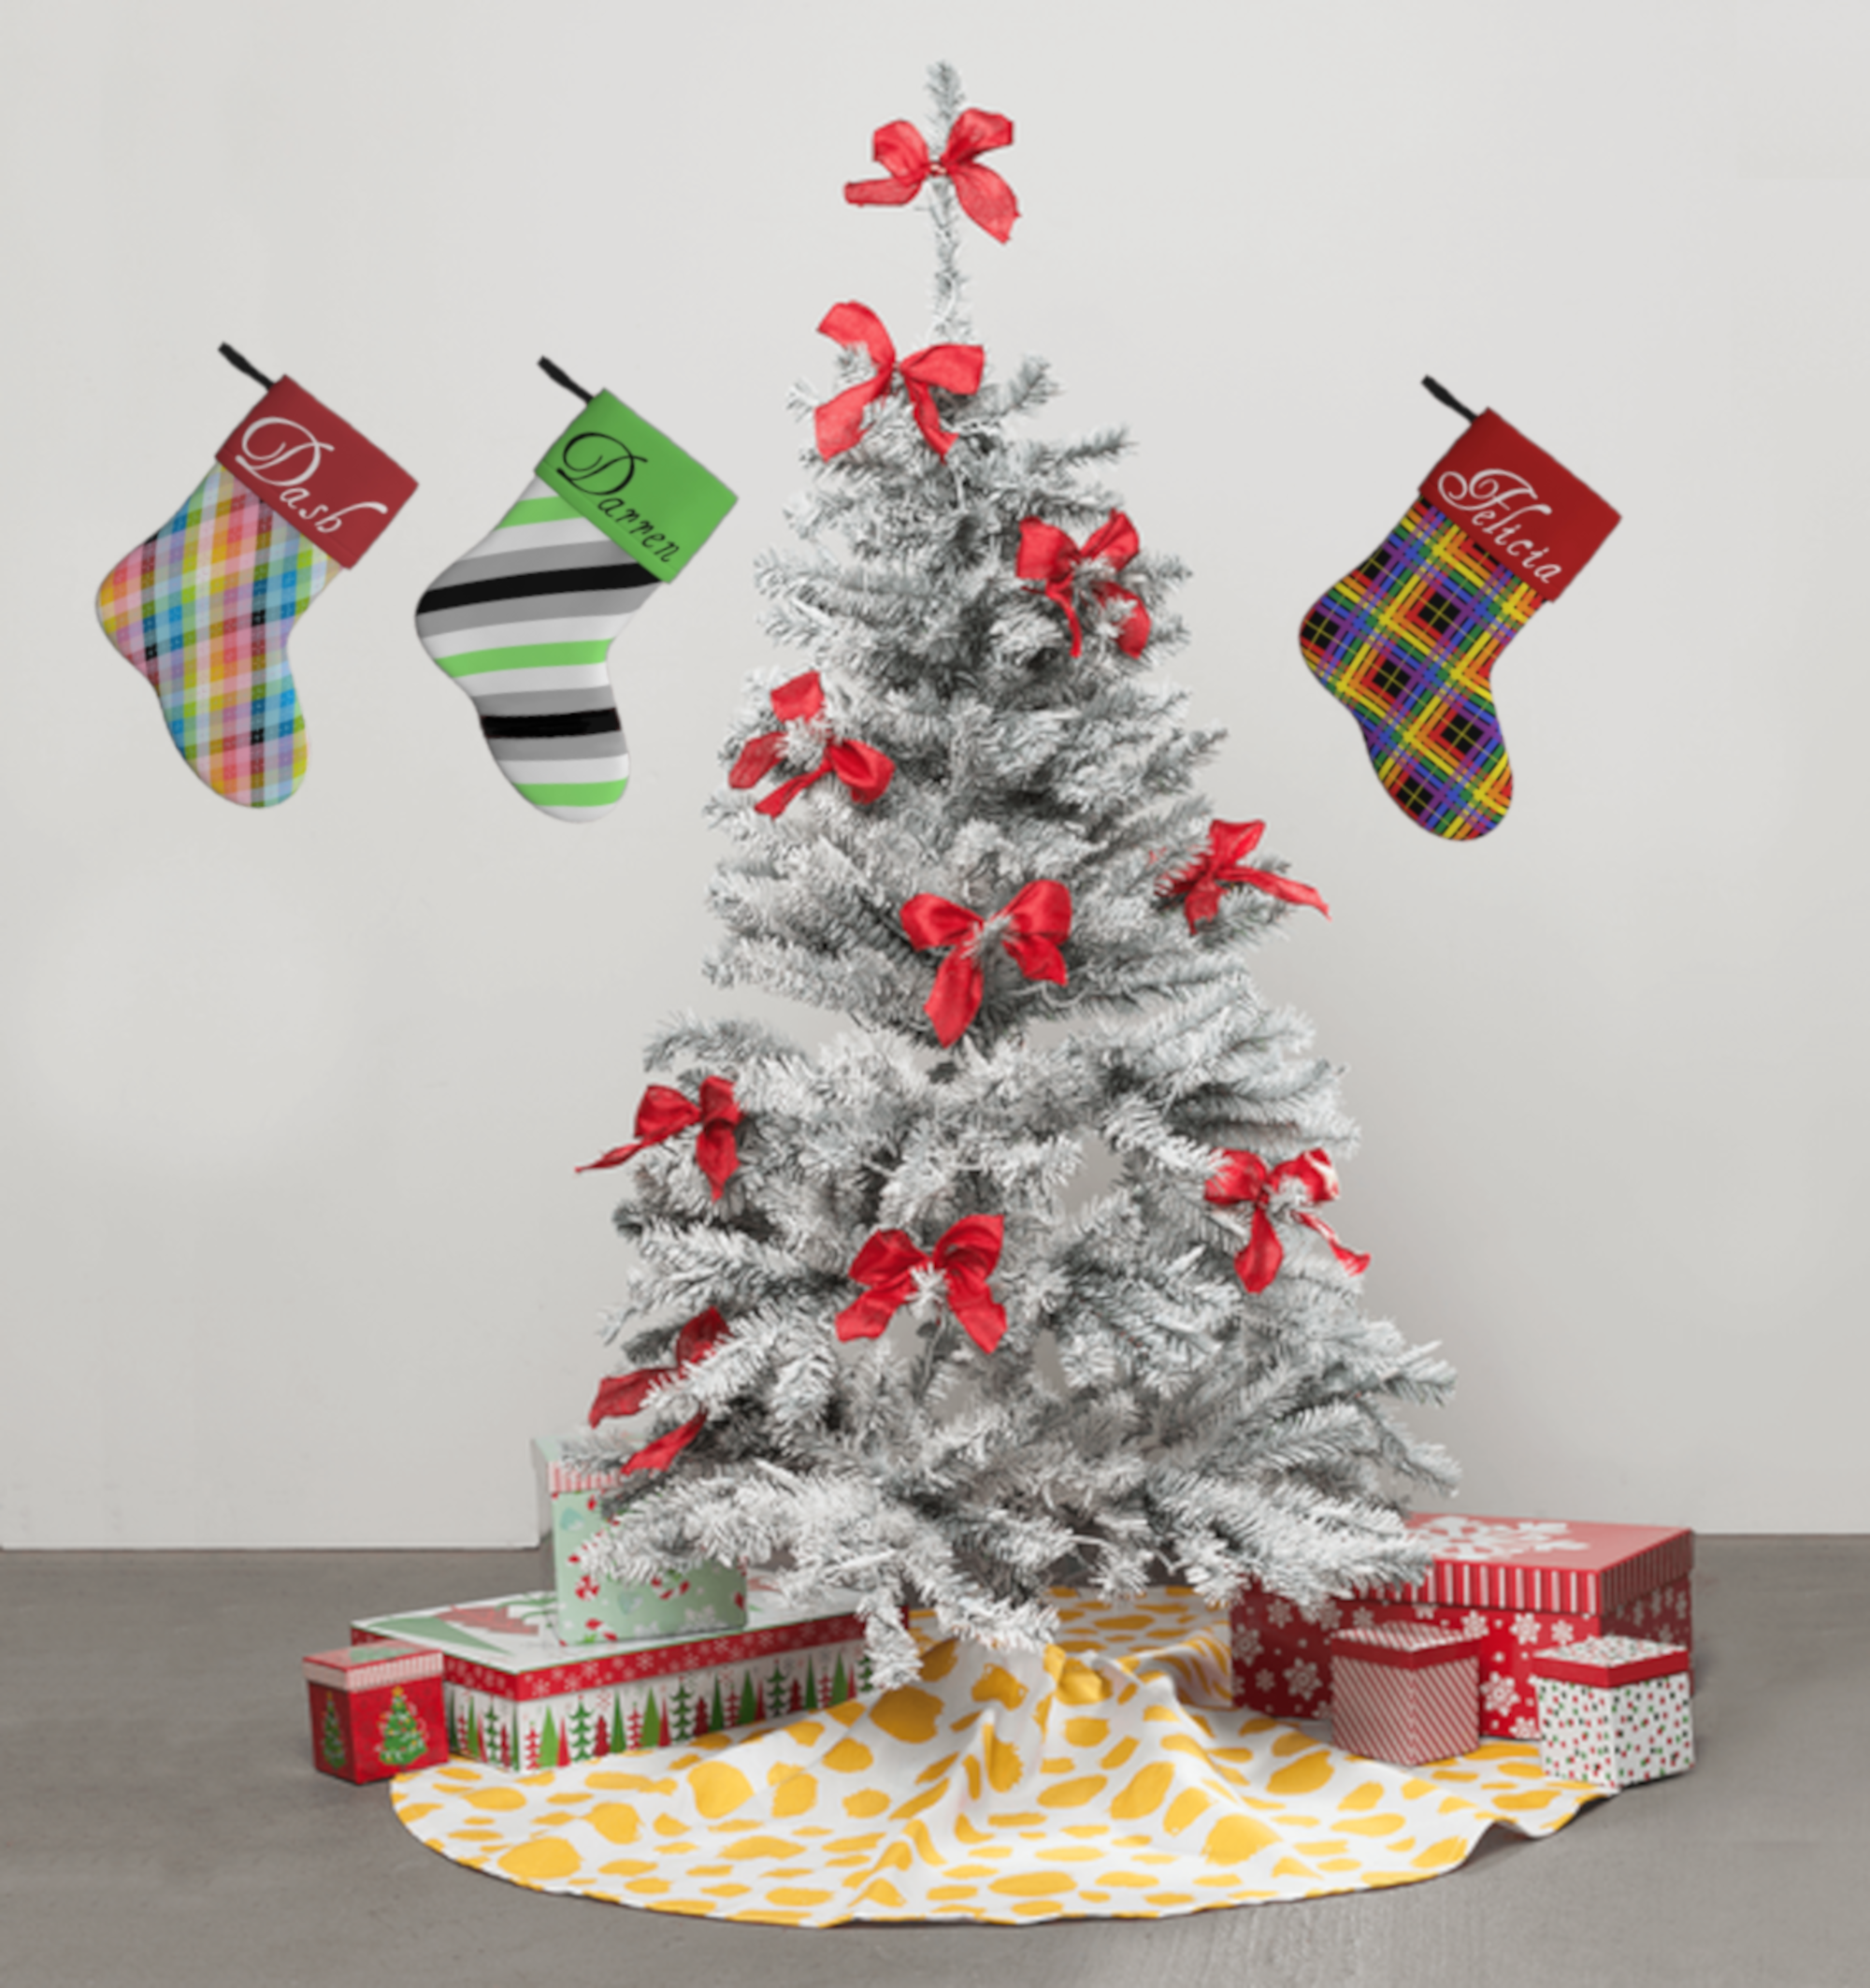 Image of a white Christmas tree with red bows on the branches. There are red and white presents sitting below the tree, on a yellow polka-dotted tree skirt. On the wall behind the tree, three stockings are hanging.